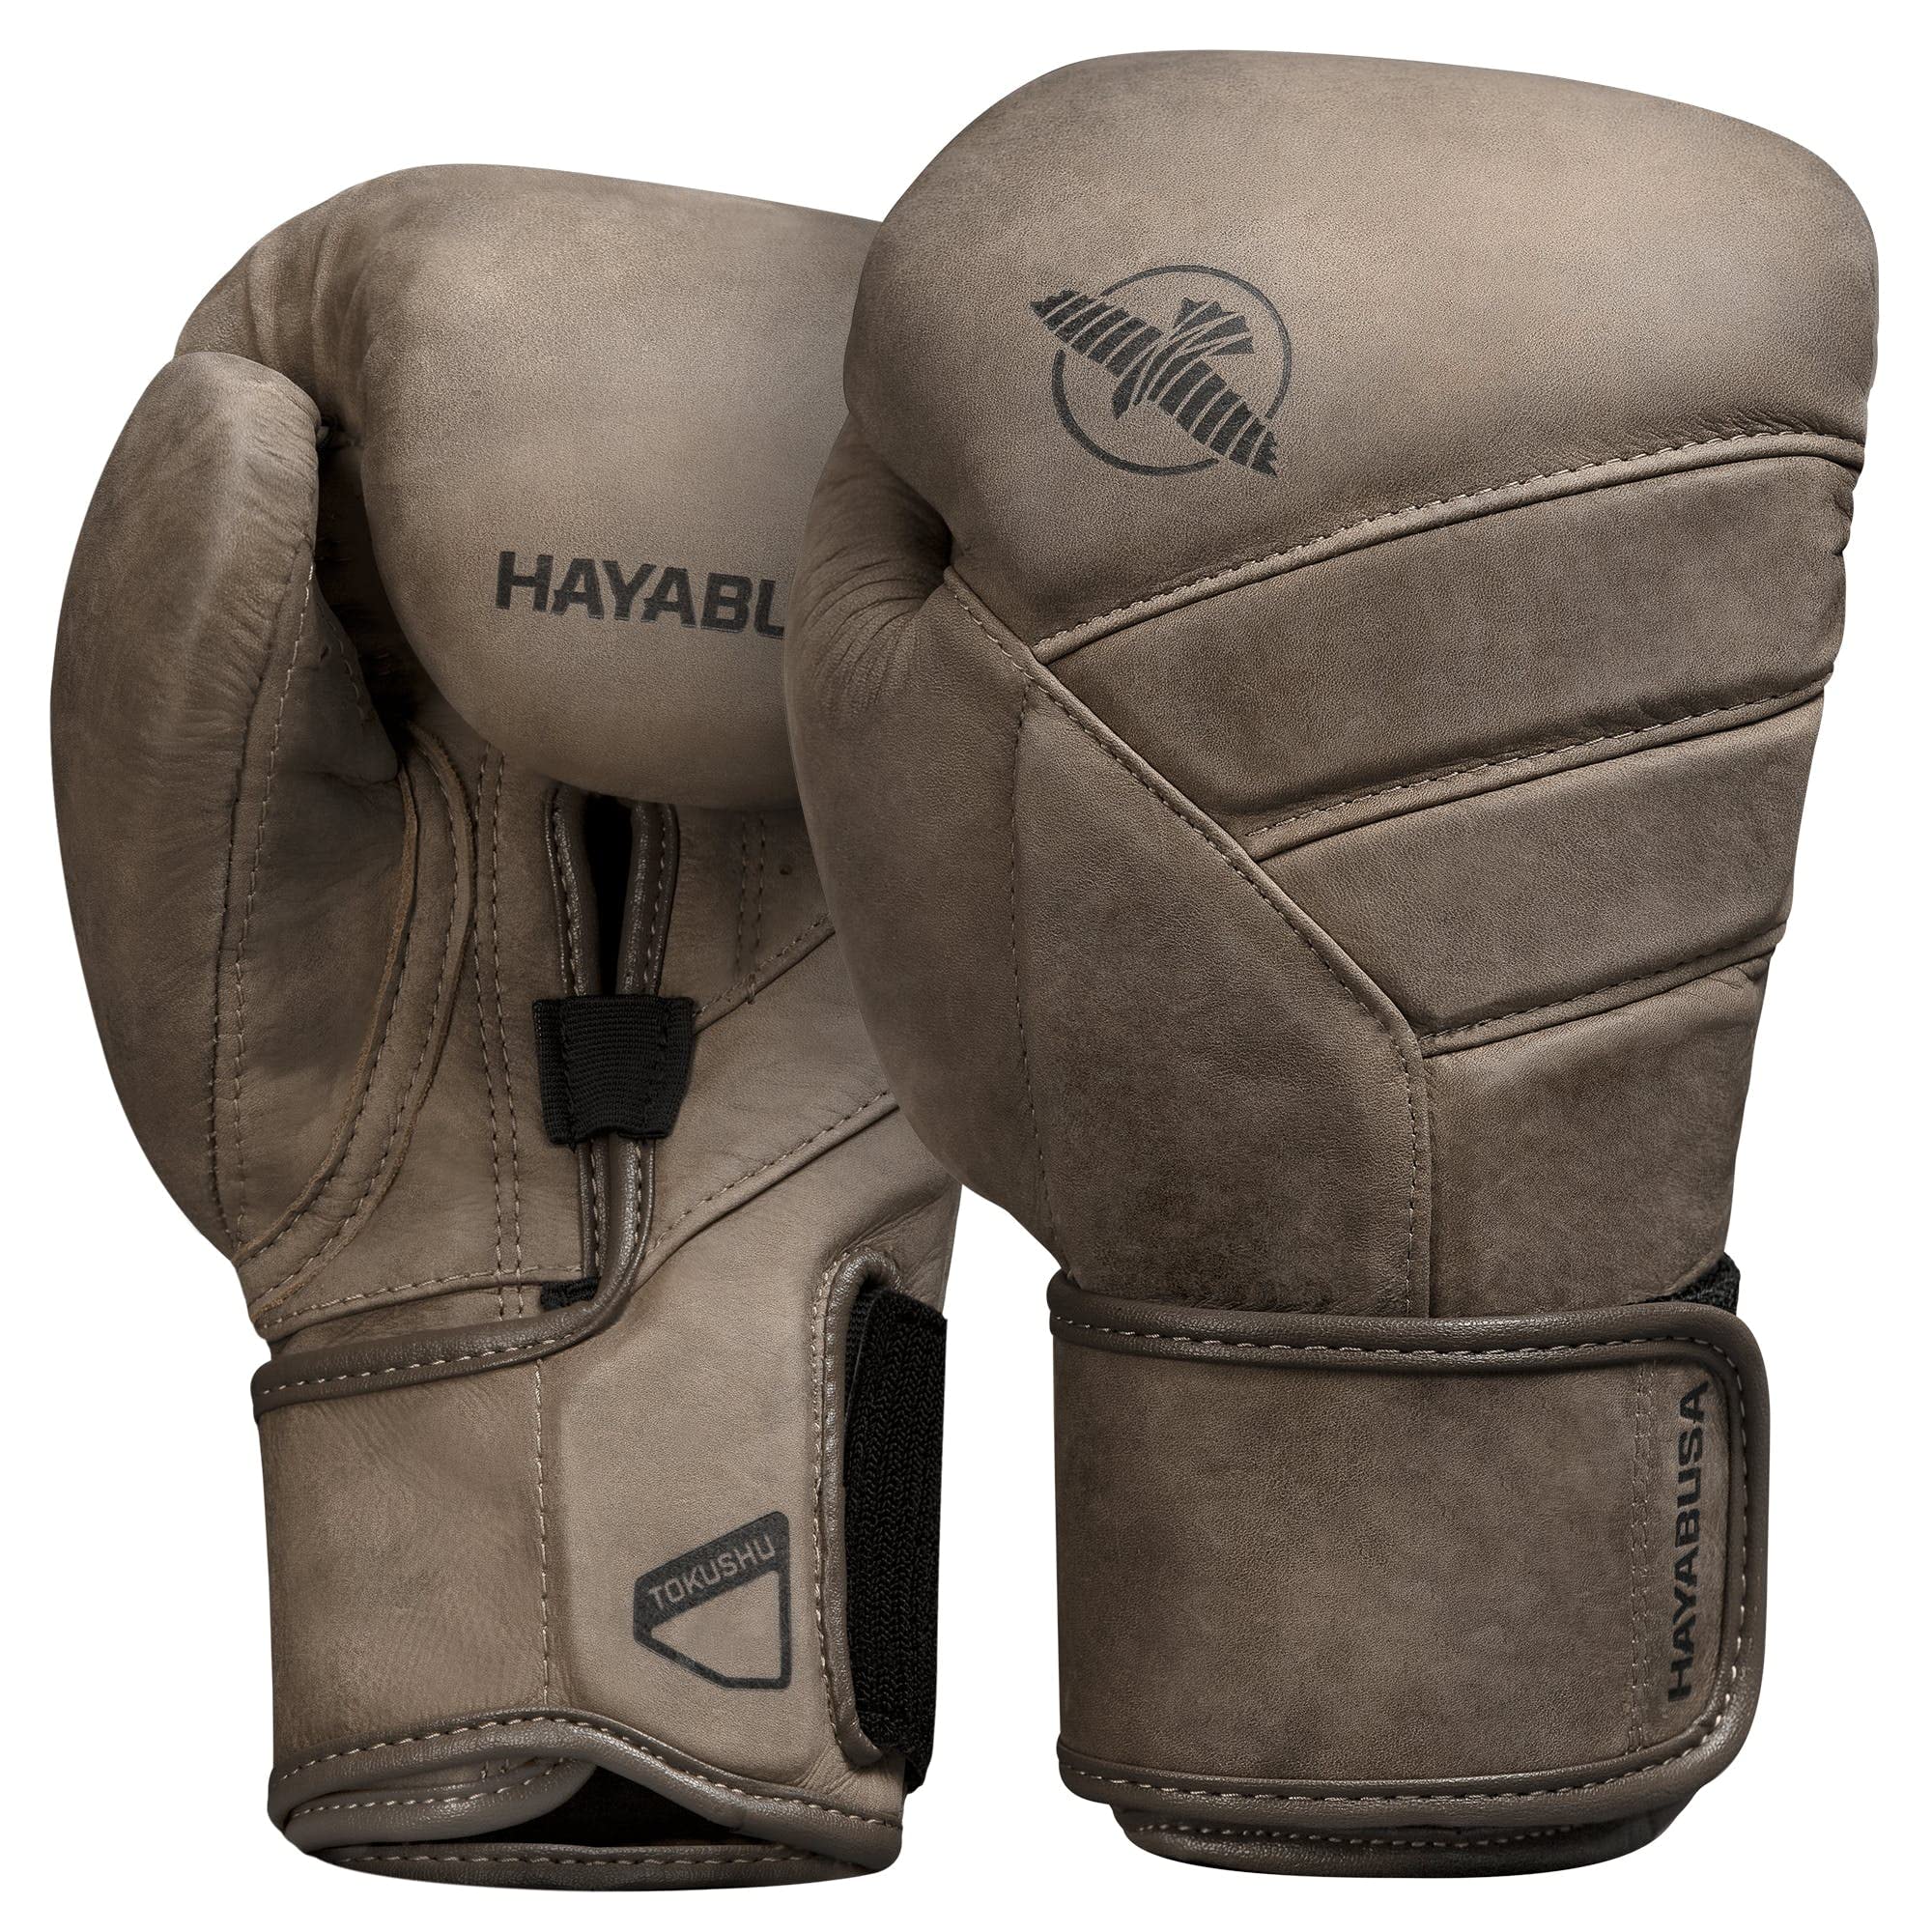 Hayabusa T3 LX Leather Boxing gloves Men and Women for Training Sparring Heavy Bag and Mitt Work - Brown, 16 oz